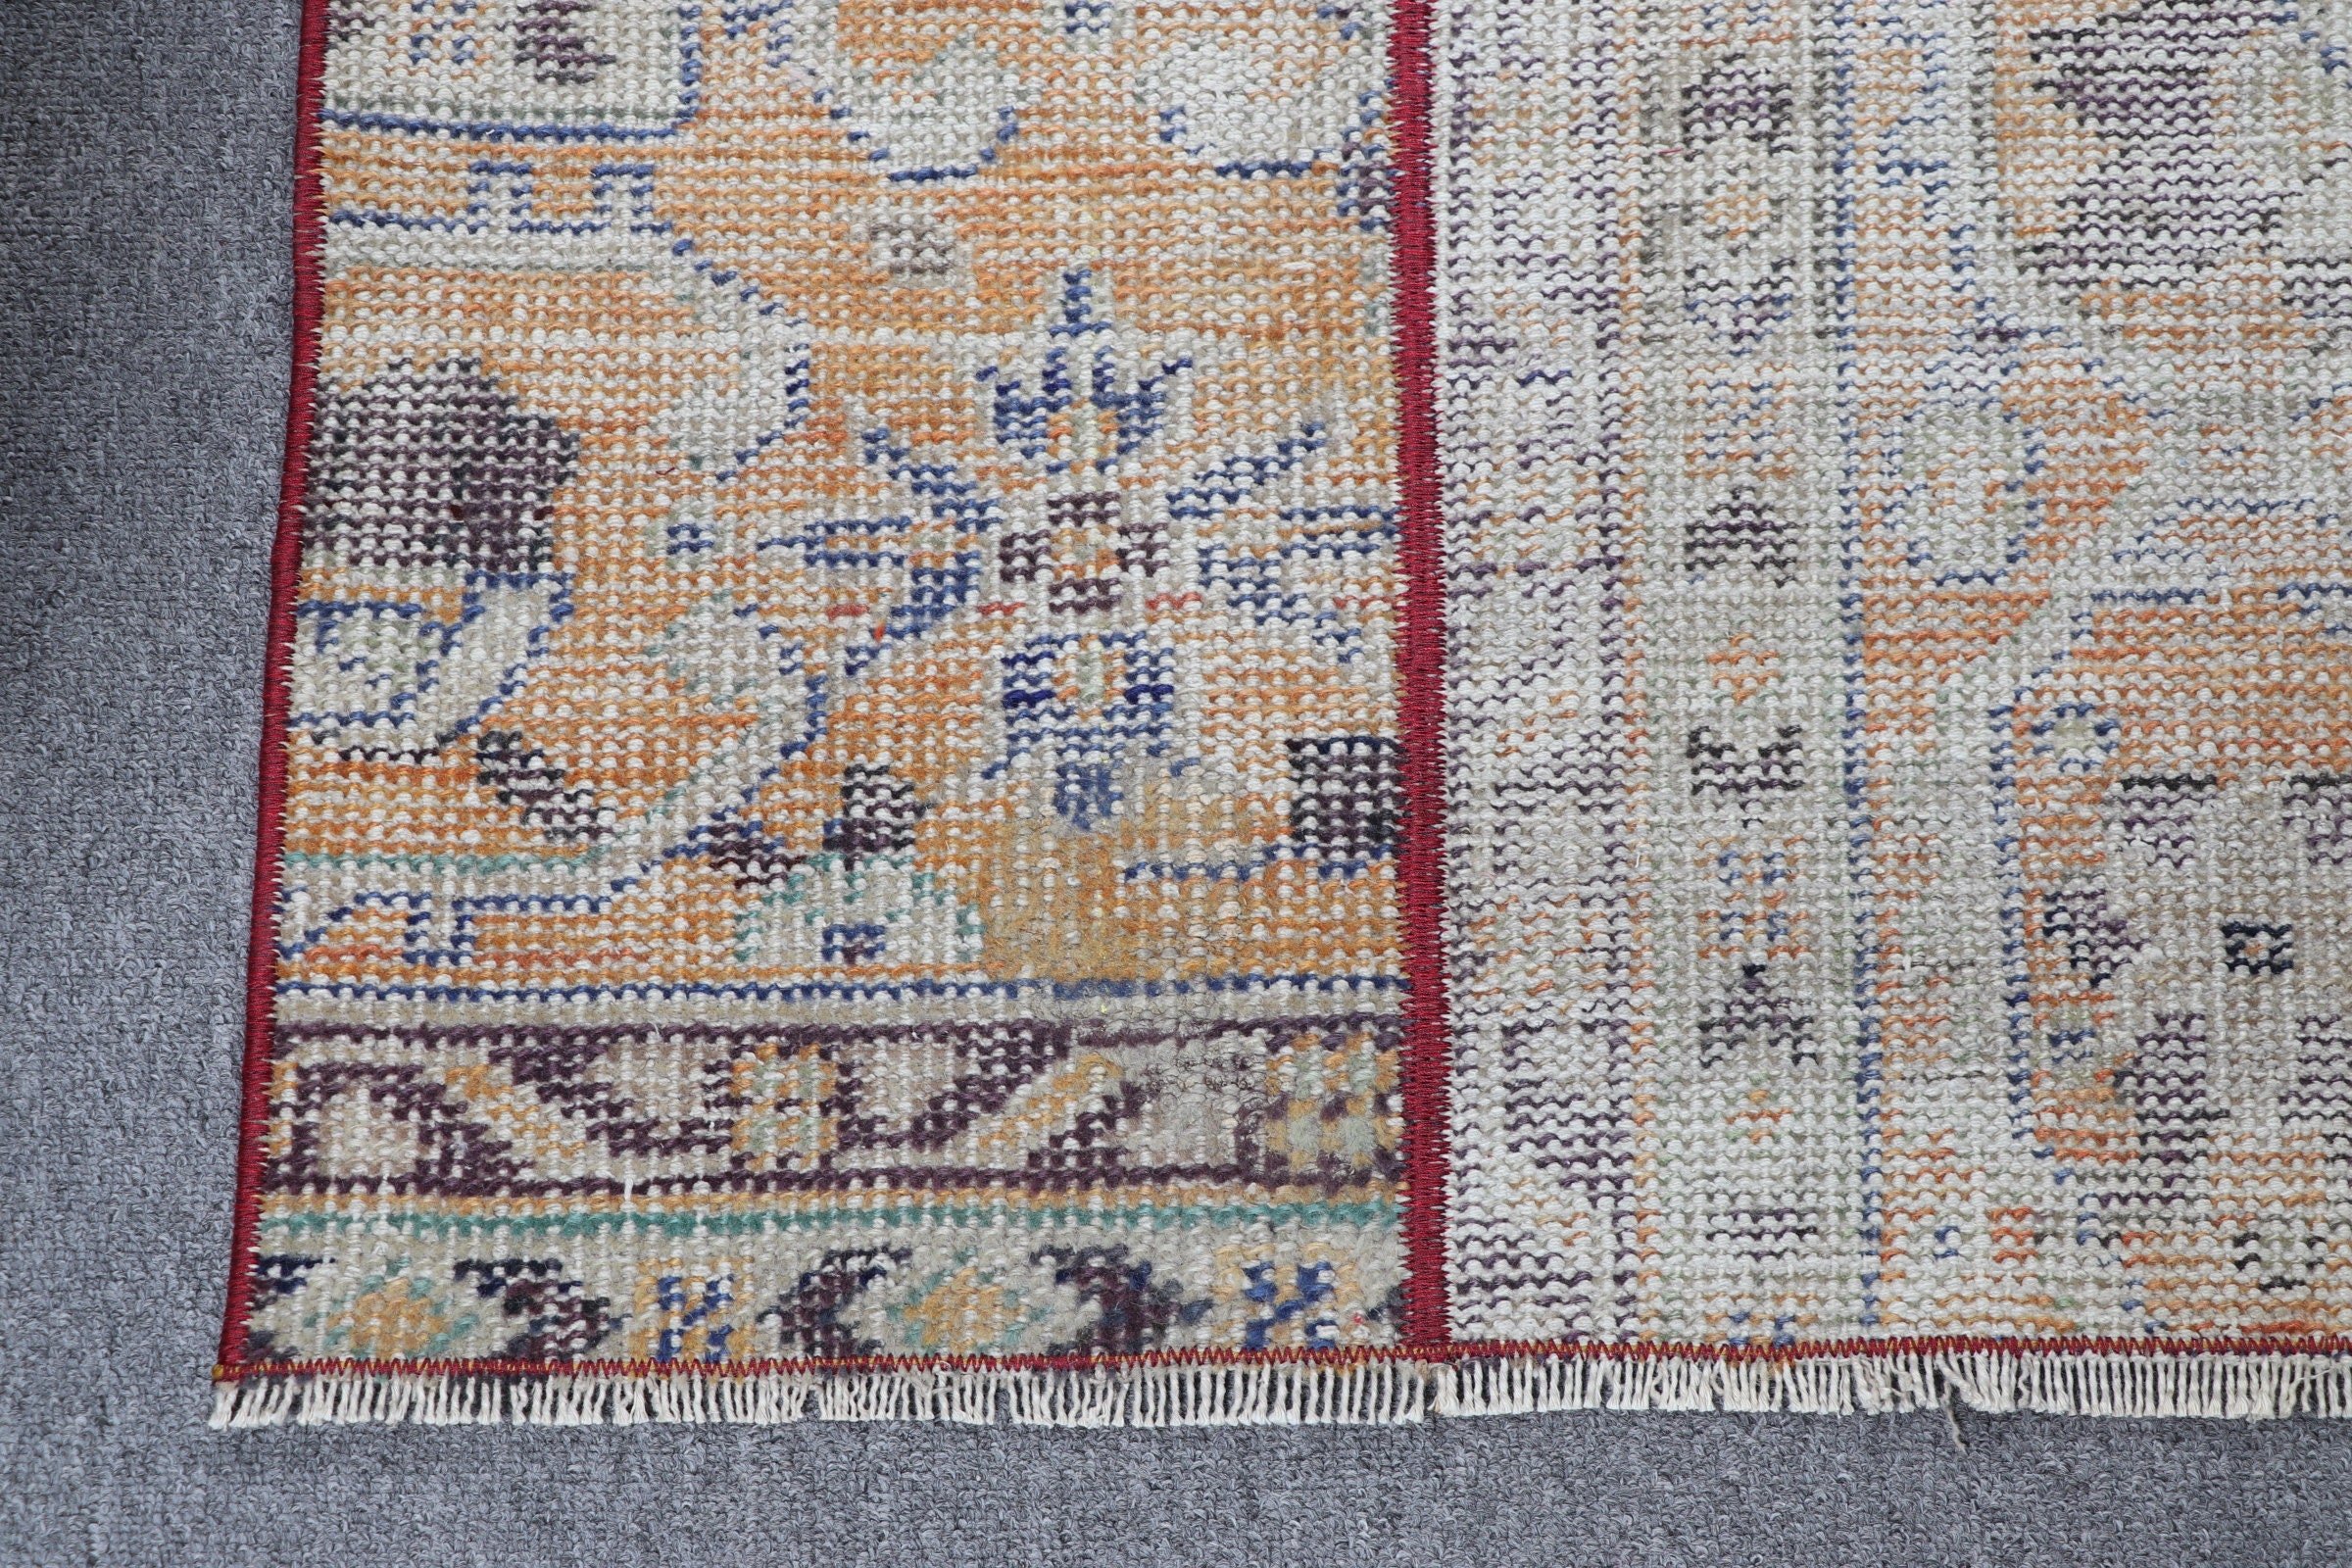 Floor Rug, Rugs for Kitchen, Turkish Rug, Bright Rug, Bathroom Rug, 2.1x2.8 ft Small Rugs, Vintage Rugs, Yellow Moroccan Rugs